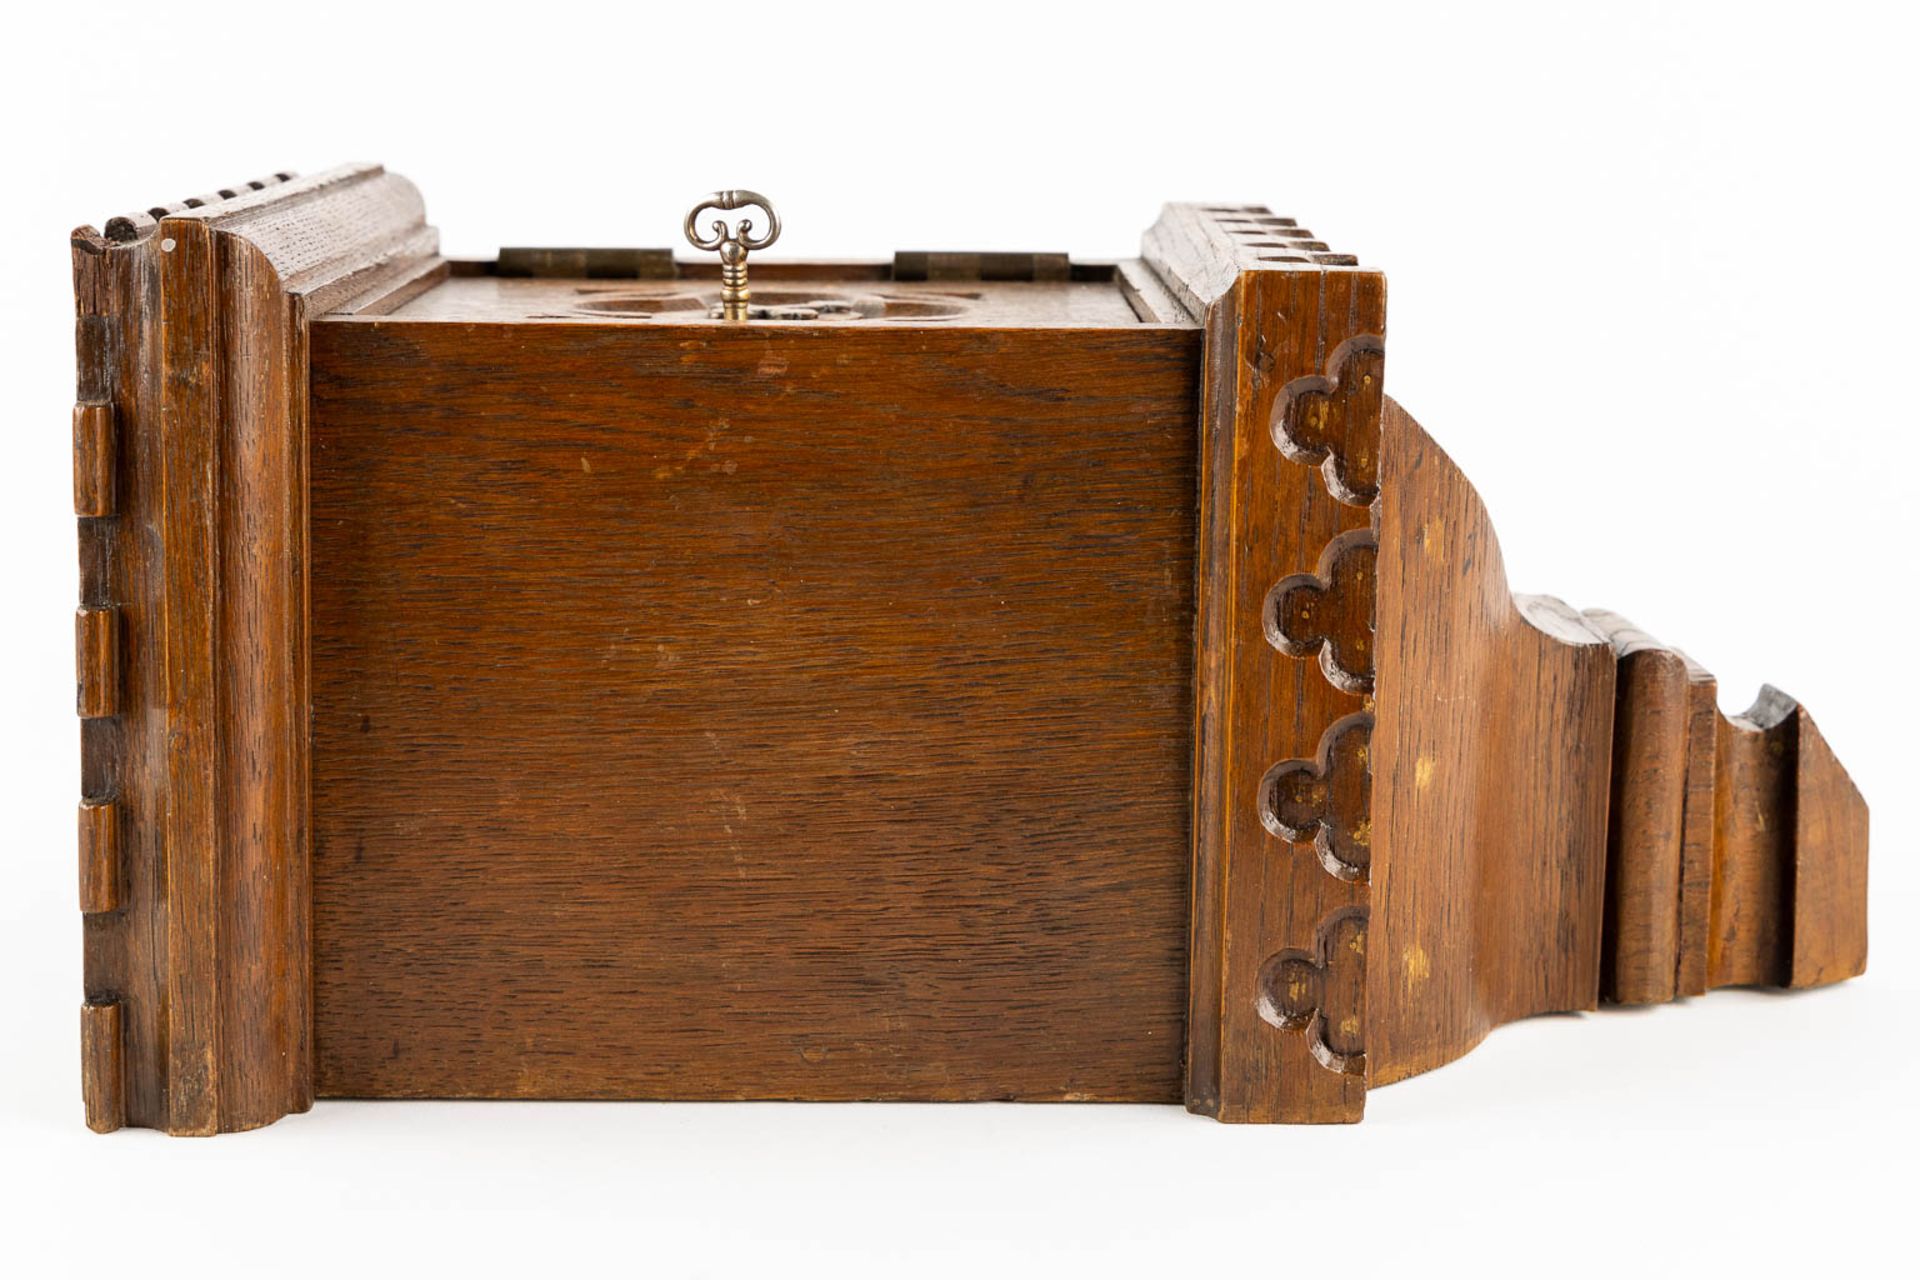 An Offertory or Poor box, sculptured oak, gothic revival. (L:20 x W:27 x H:42 cm) - Image 6 of 11